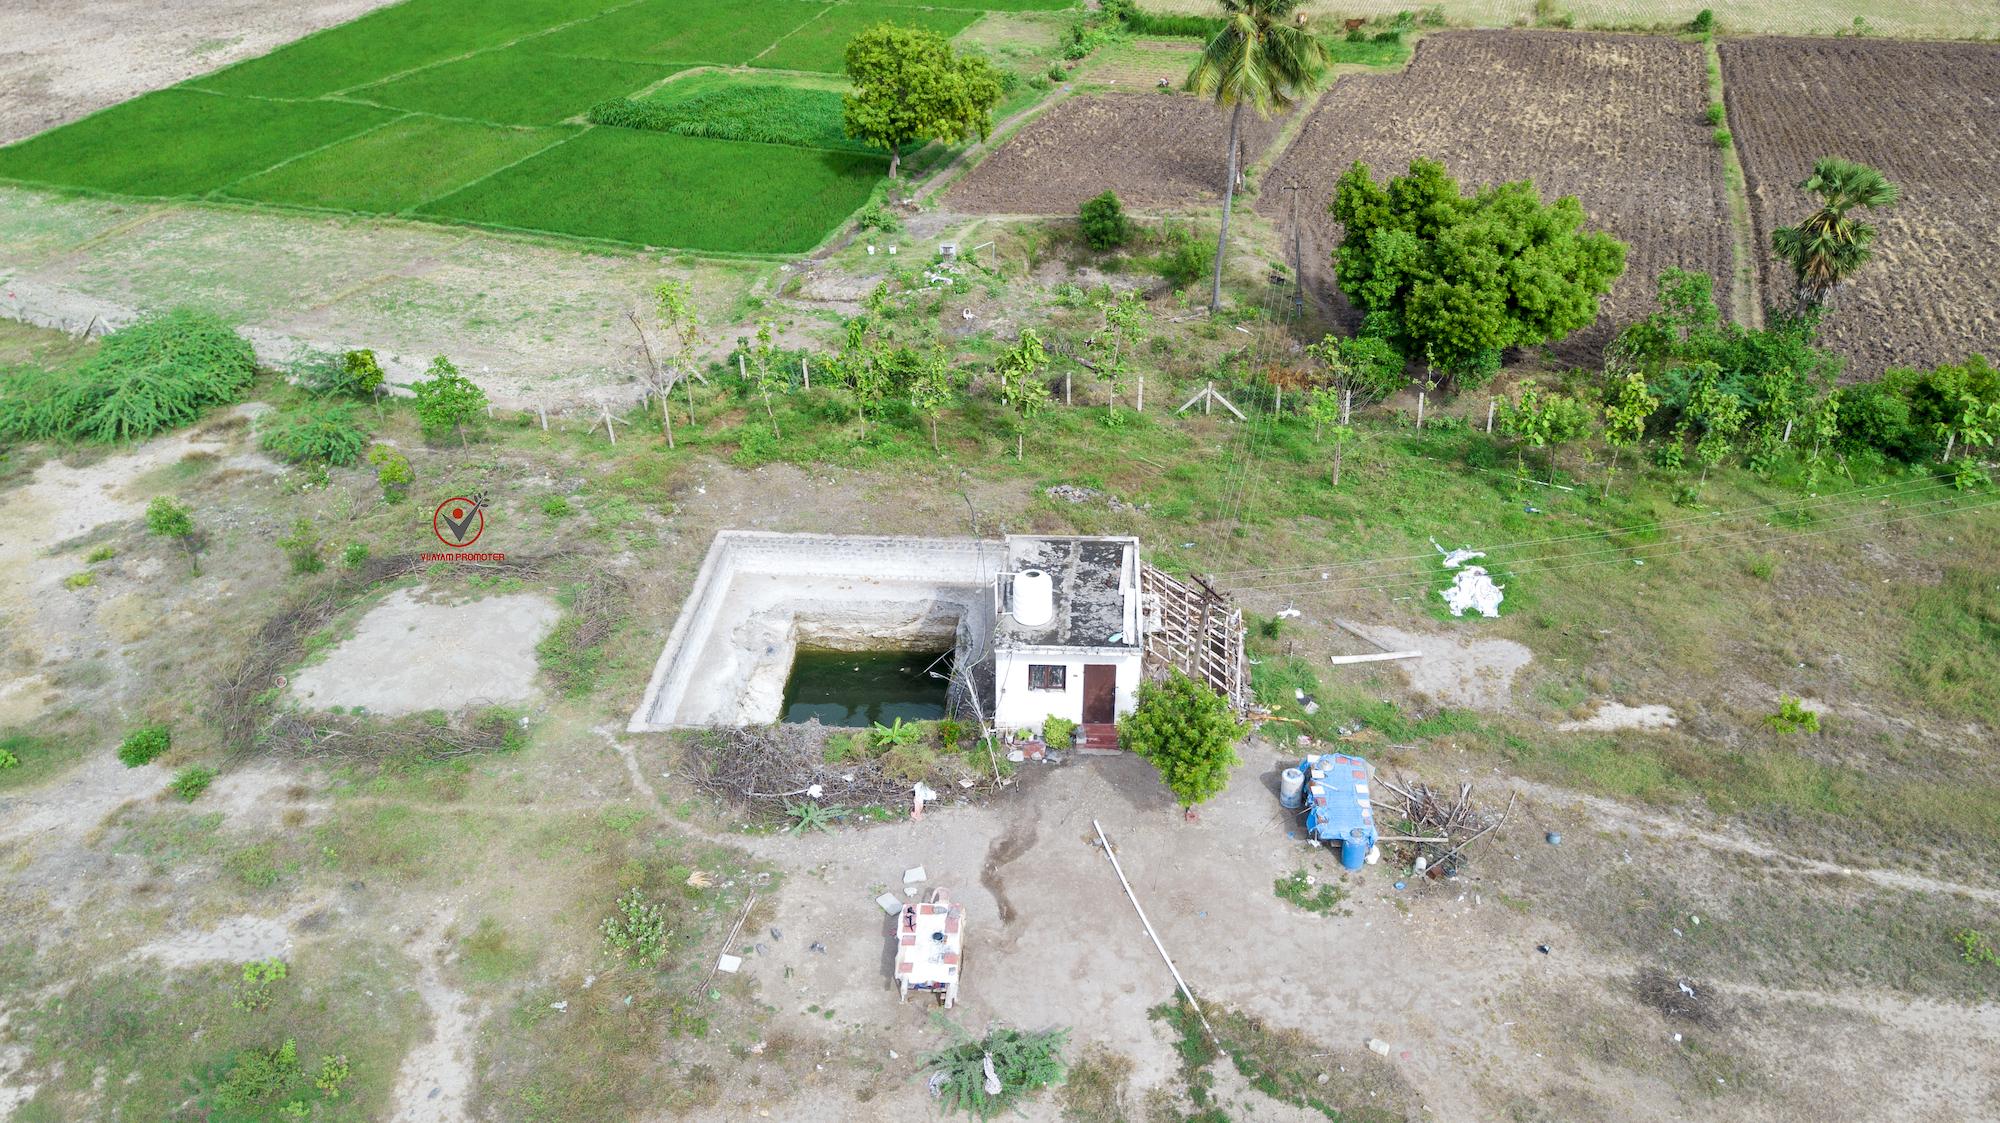 04 irrigation well - Commercial Farm Land on NH38 in Ulundurpet - Trichy Highway